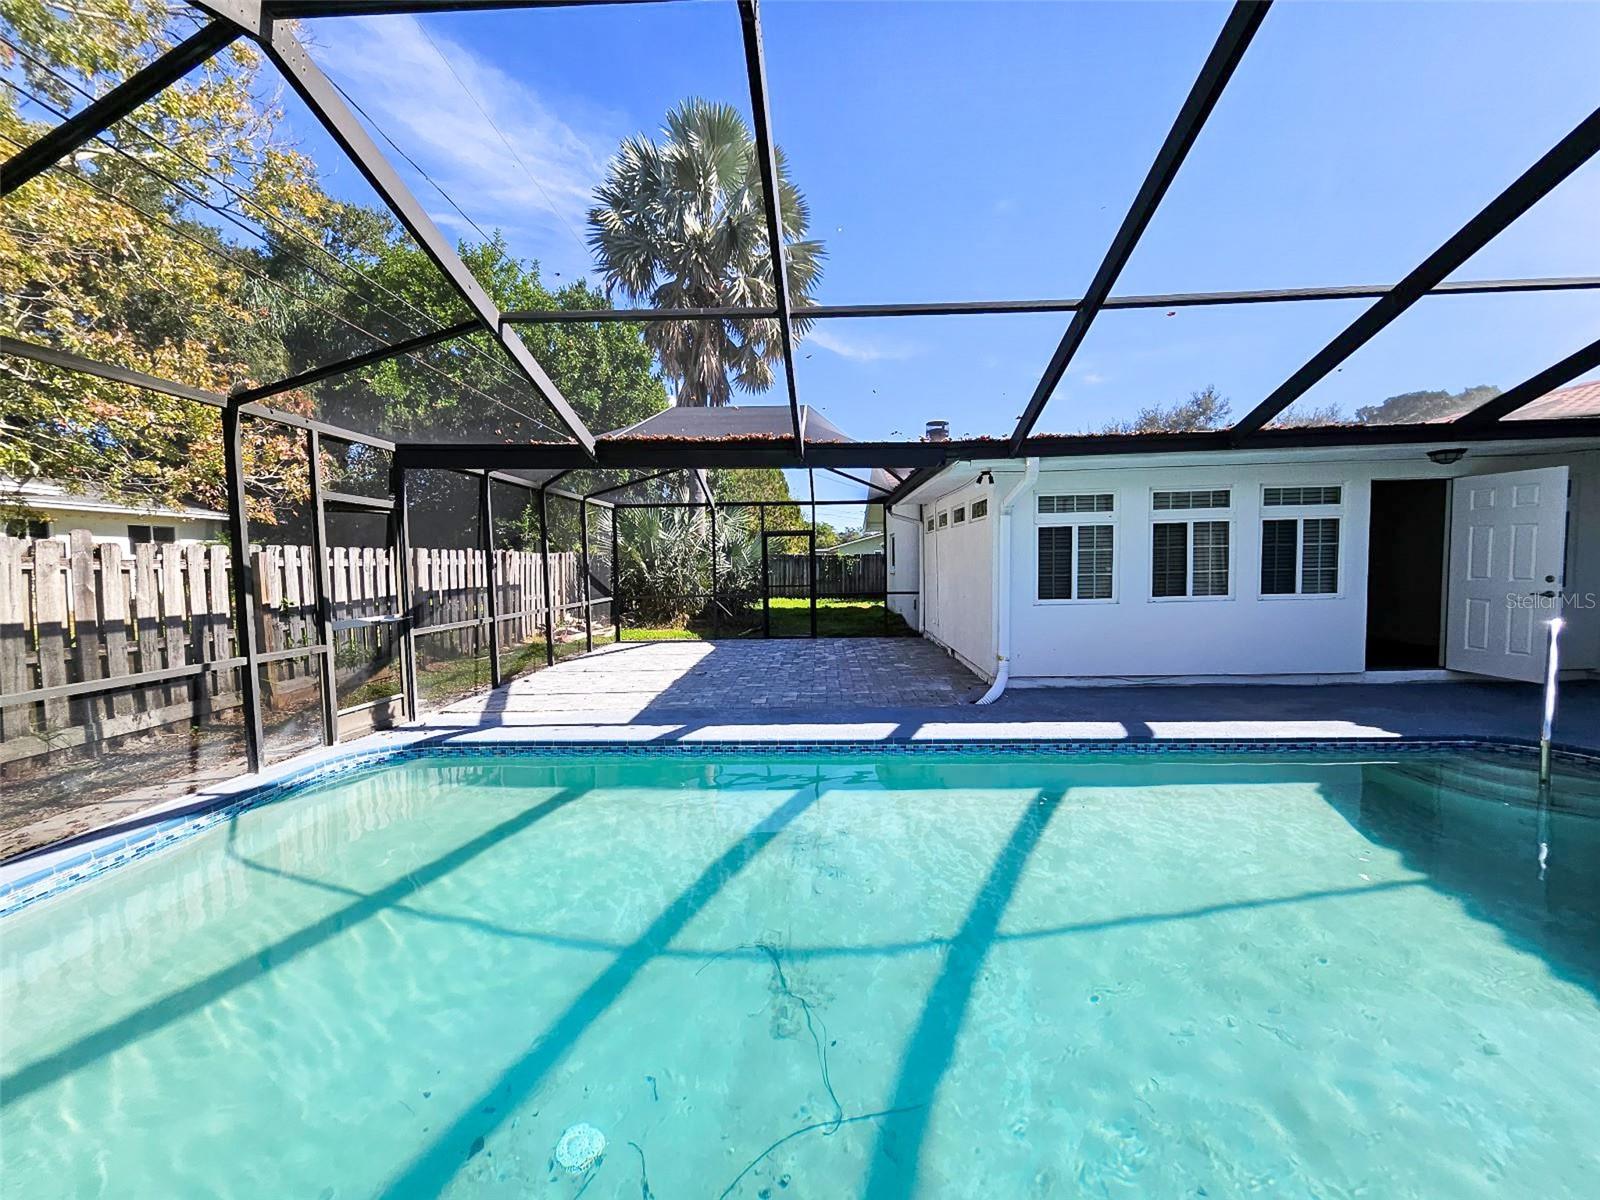 large Pool and patio for your enjoyment